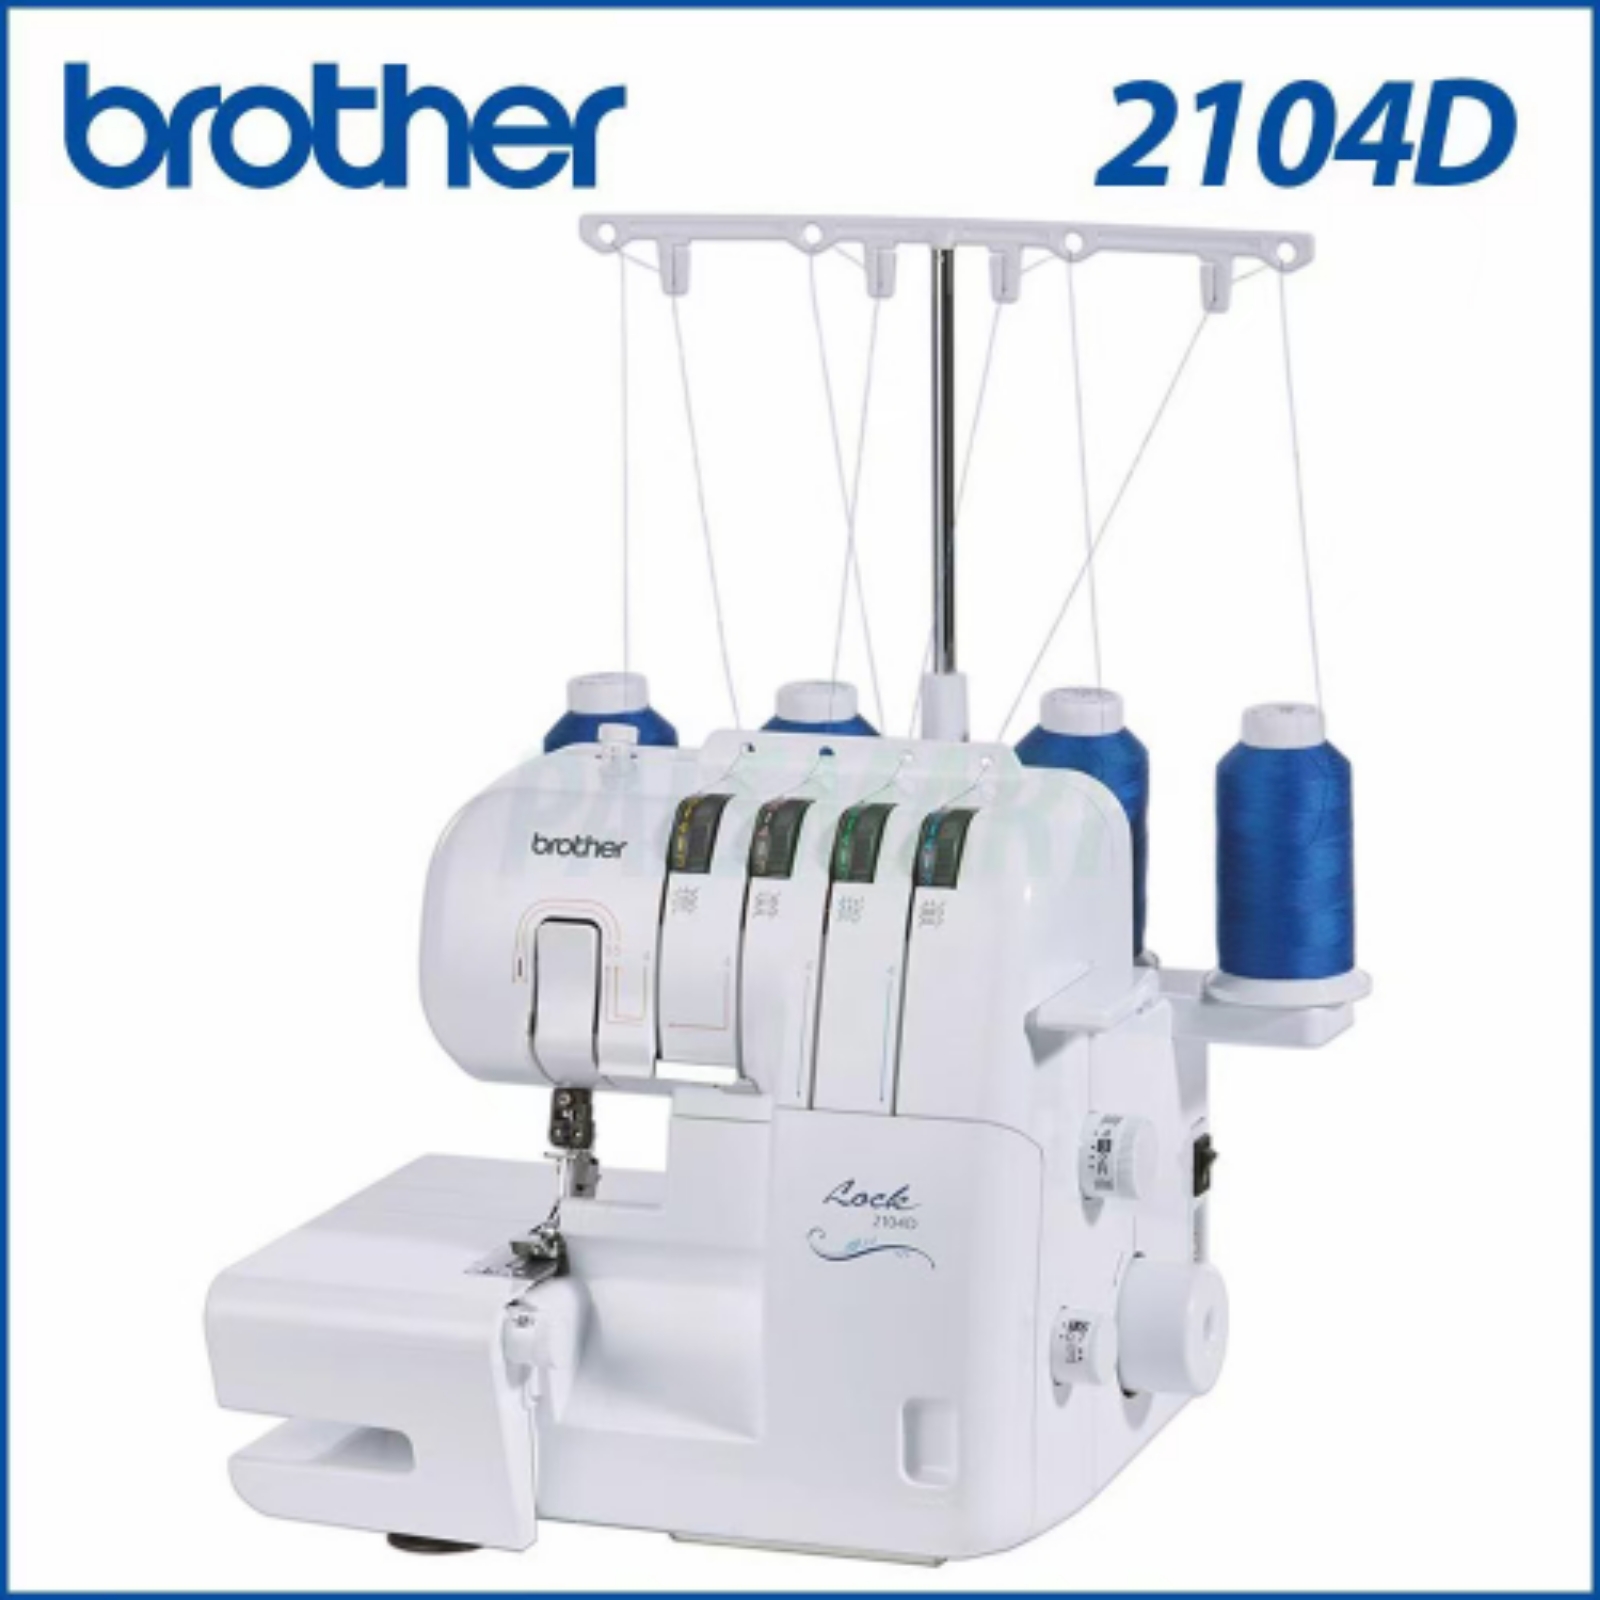 BROTHER PORTABLE OVERLOCK HOME SEWING MACHINE 